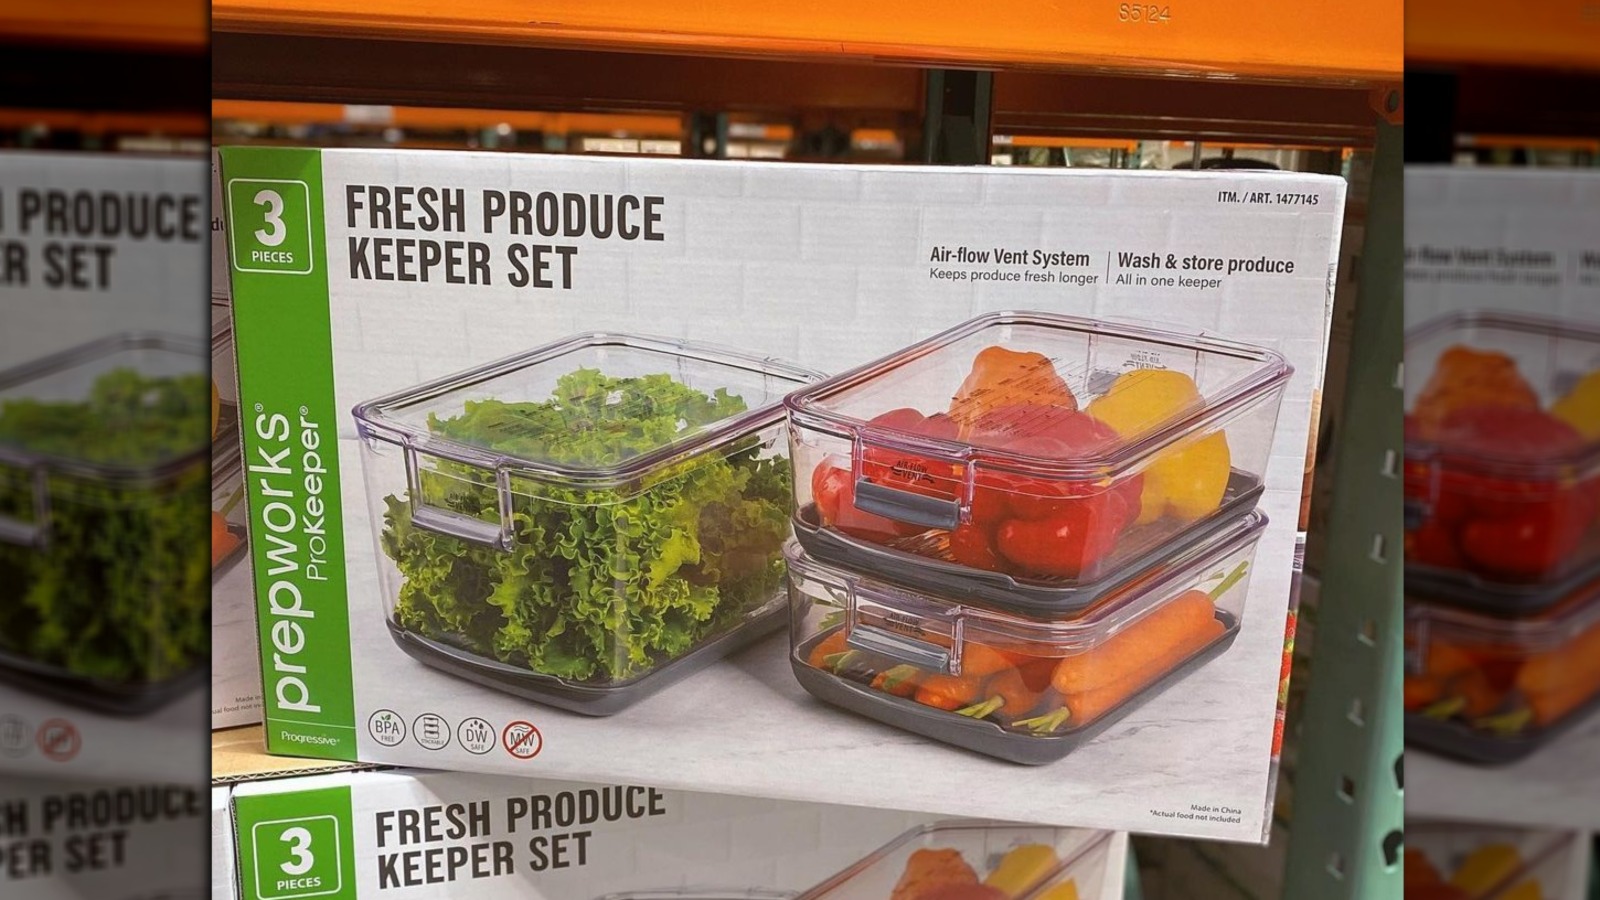 https://www.mashed.com/img/gallery/costco-shoppers-swear-by-these-produce-keepers/l-intro-1618423765.jpg